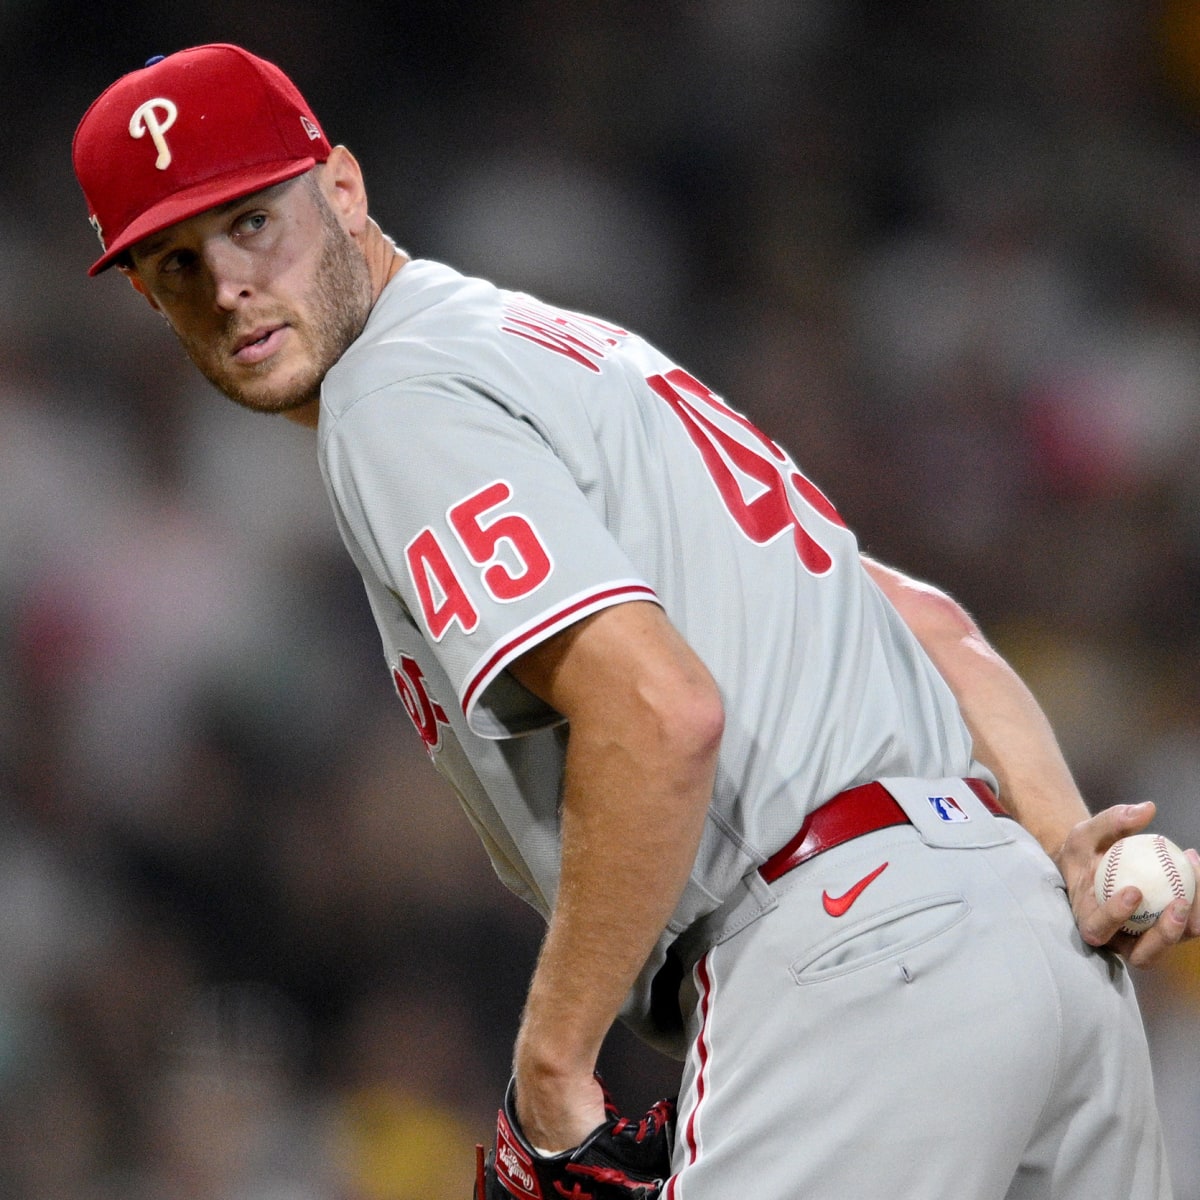 WAMC Sports Report 10/4/23: Wheeler strikes out 8, Phillies top Marlins 4-1